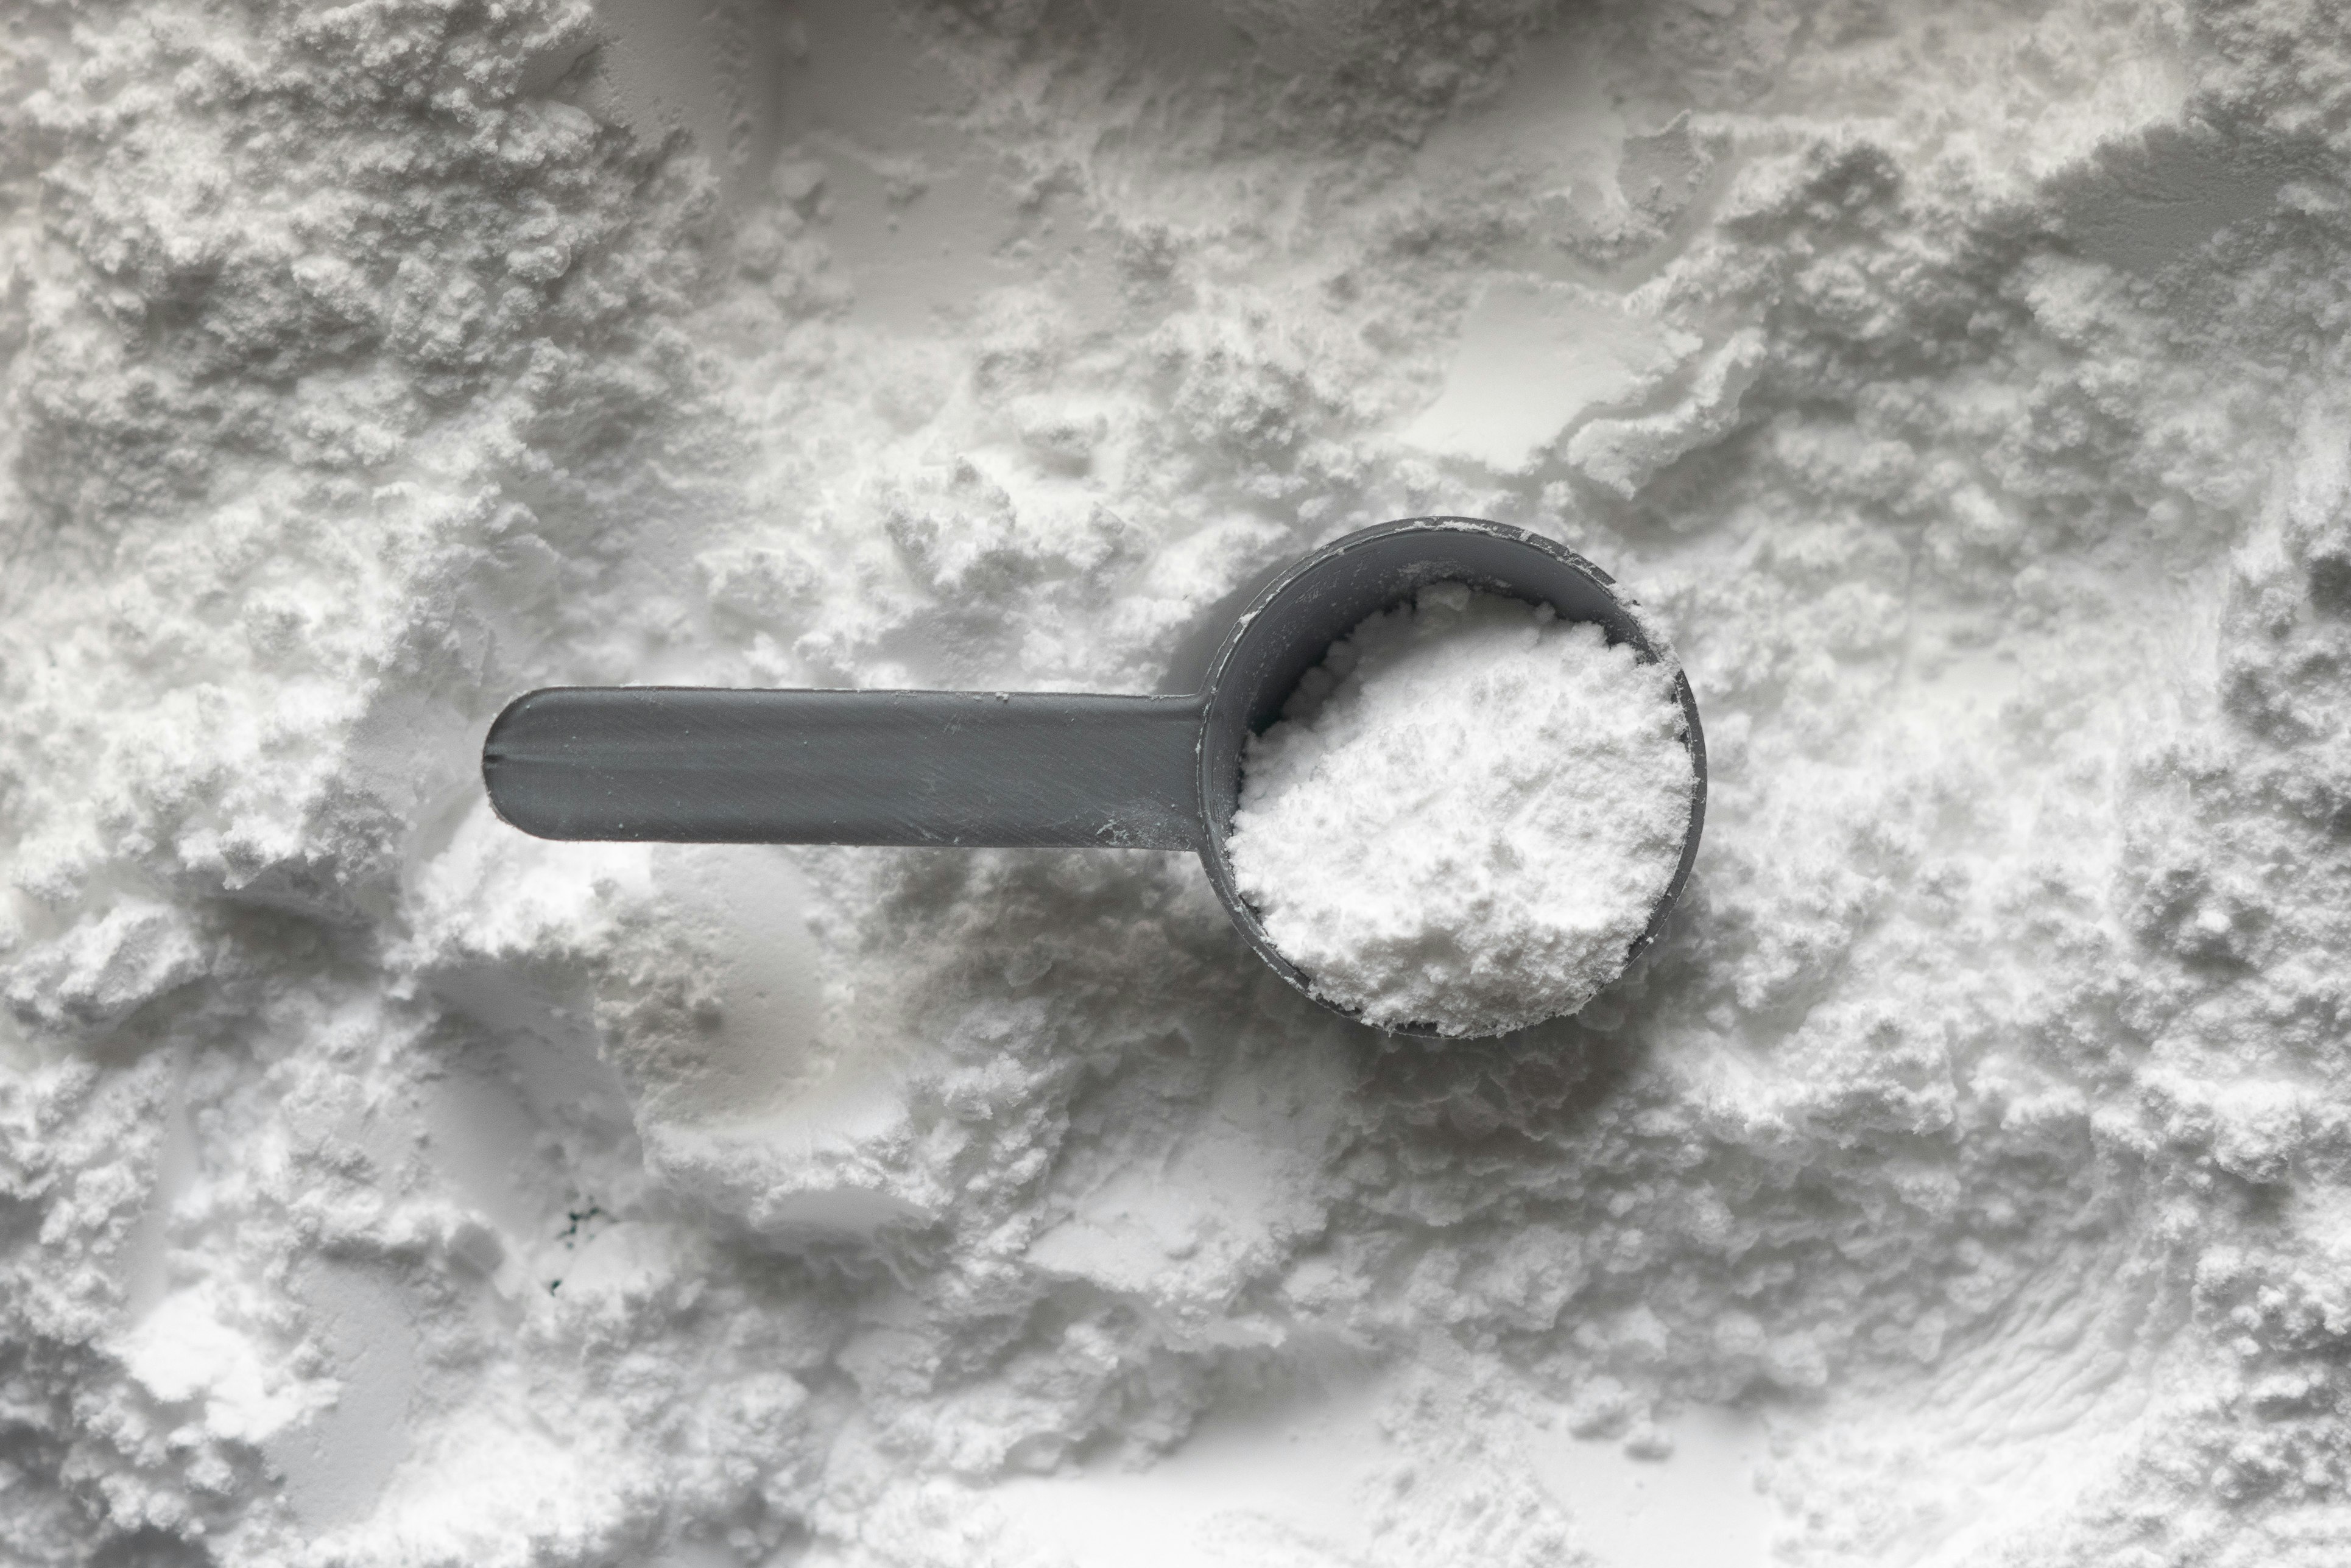 One scoop of white creatine monohydrate powder. A sports supplement that is well studied and researched within the health and fitness industry, it helps to increase strength, muscle mass and endurance.